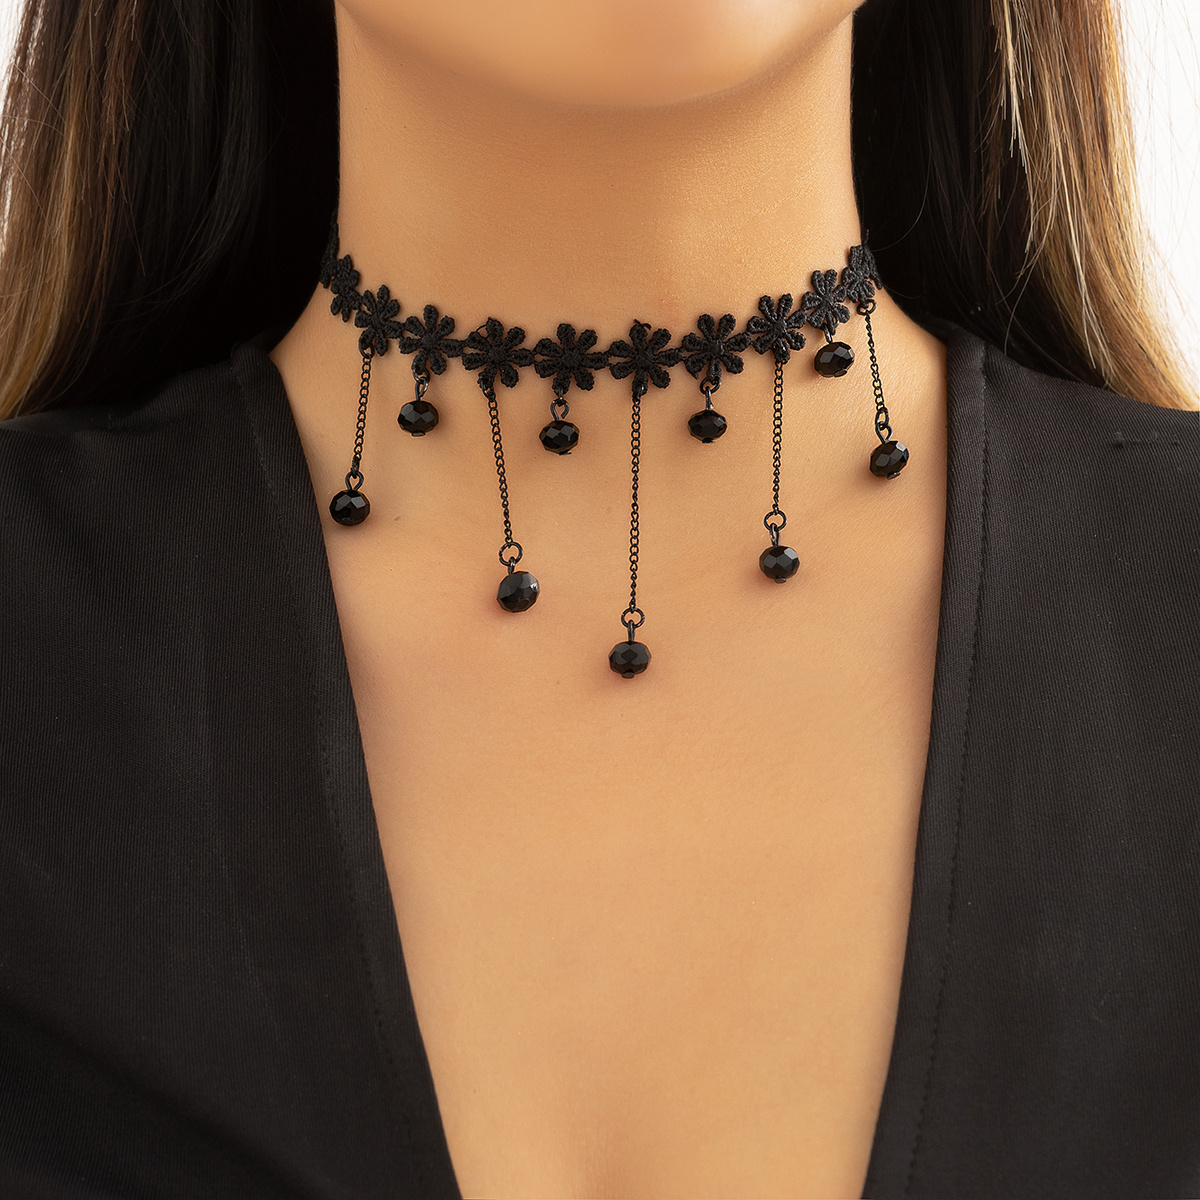 Gothic Black Gemstone Waterdrop Pearl Lace Choker Necklace